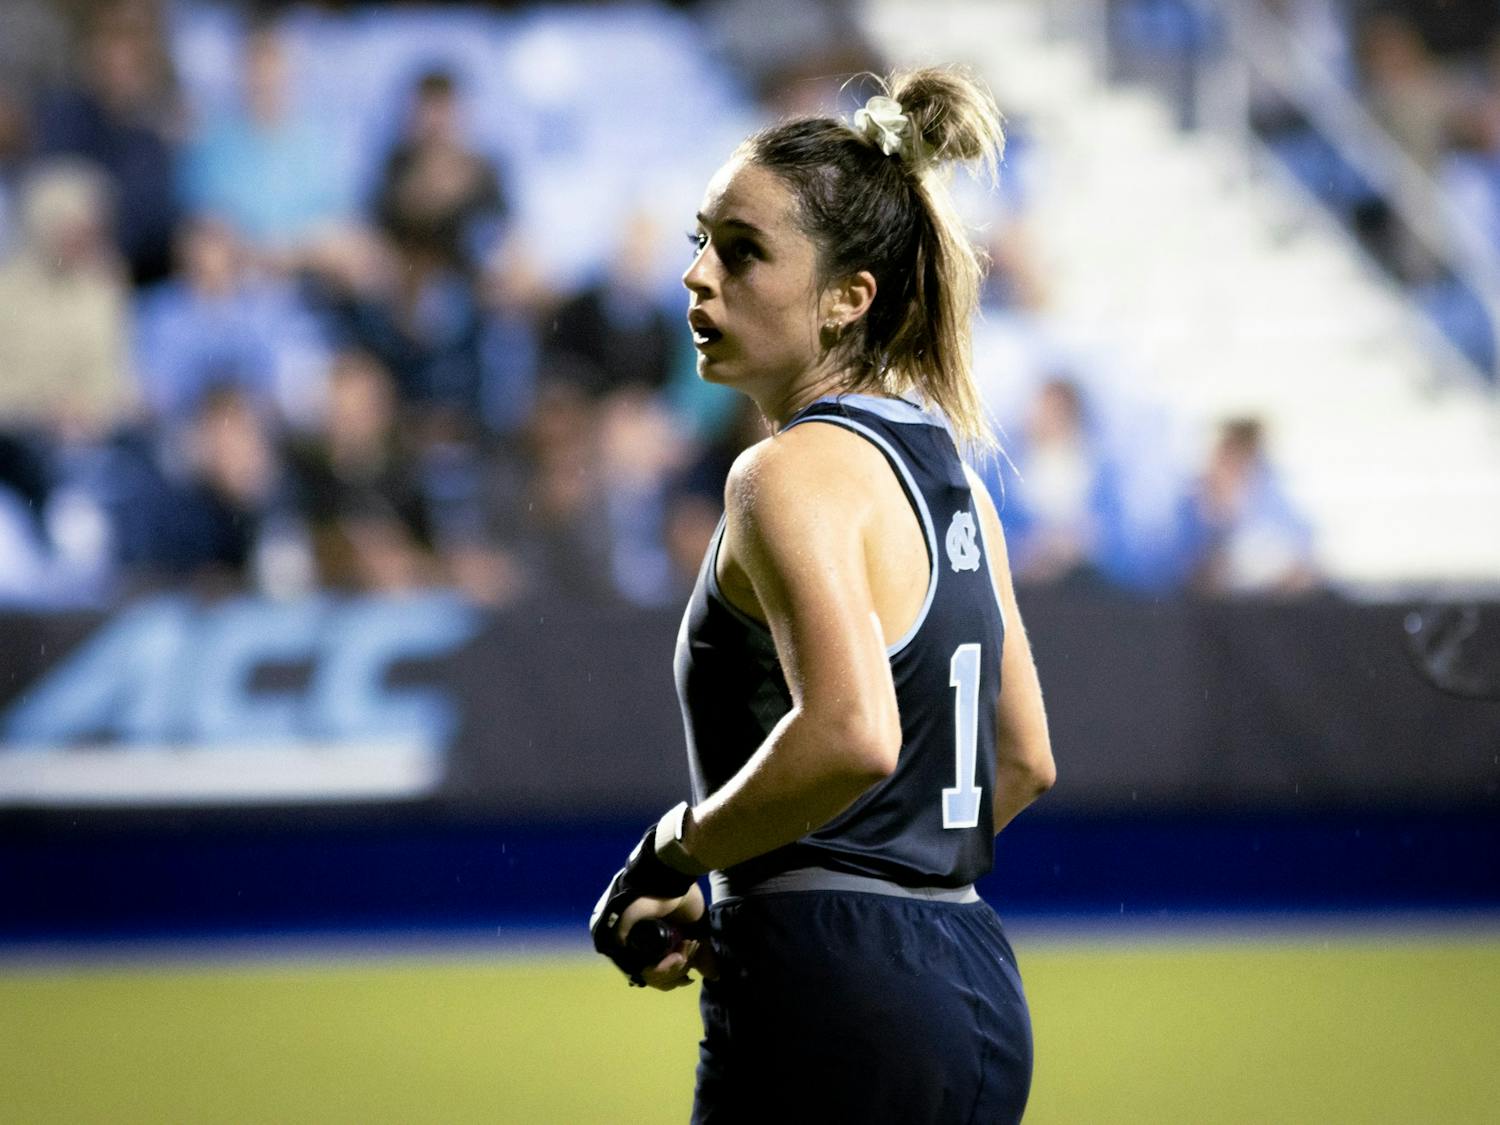 UNC senior forward Erin Matson (1) takes a breath between plays during the third quarter of the Tar Heels' Oct. 8 home game against the Duke Blue Devils. UNC won 4-1.